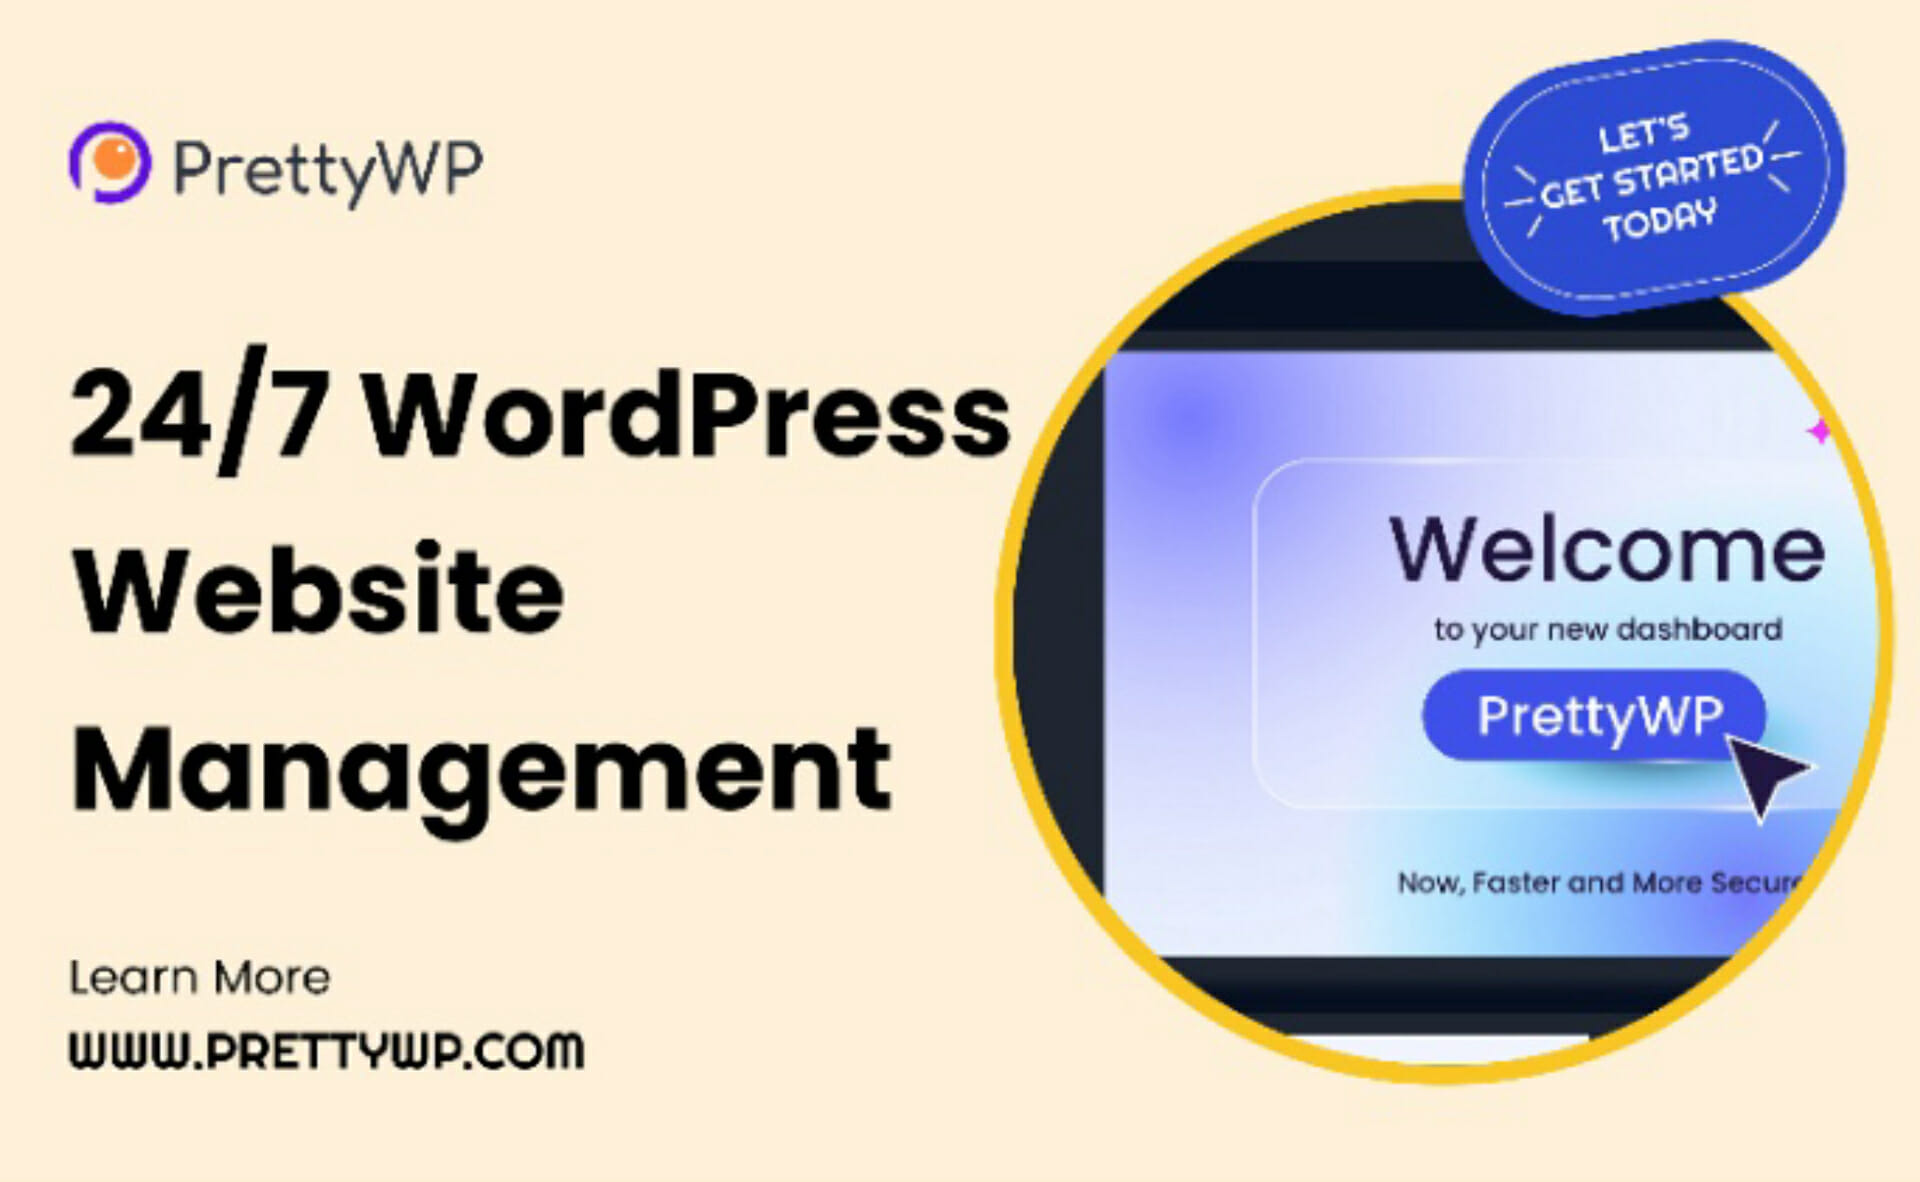 Lifetime Deal to PrettyWP – 24/7 WordPress Website Management: Care Plus Y for $69